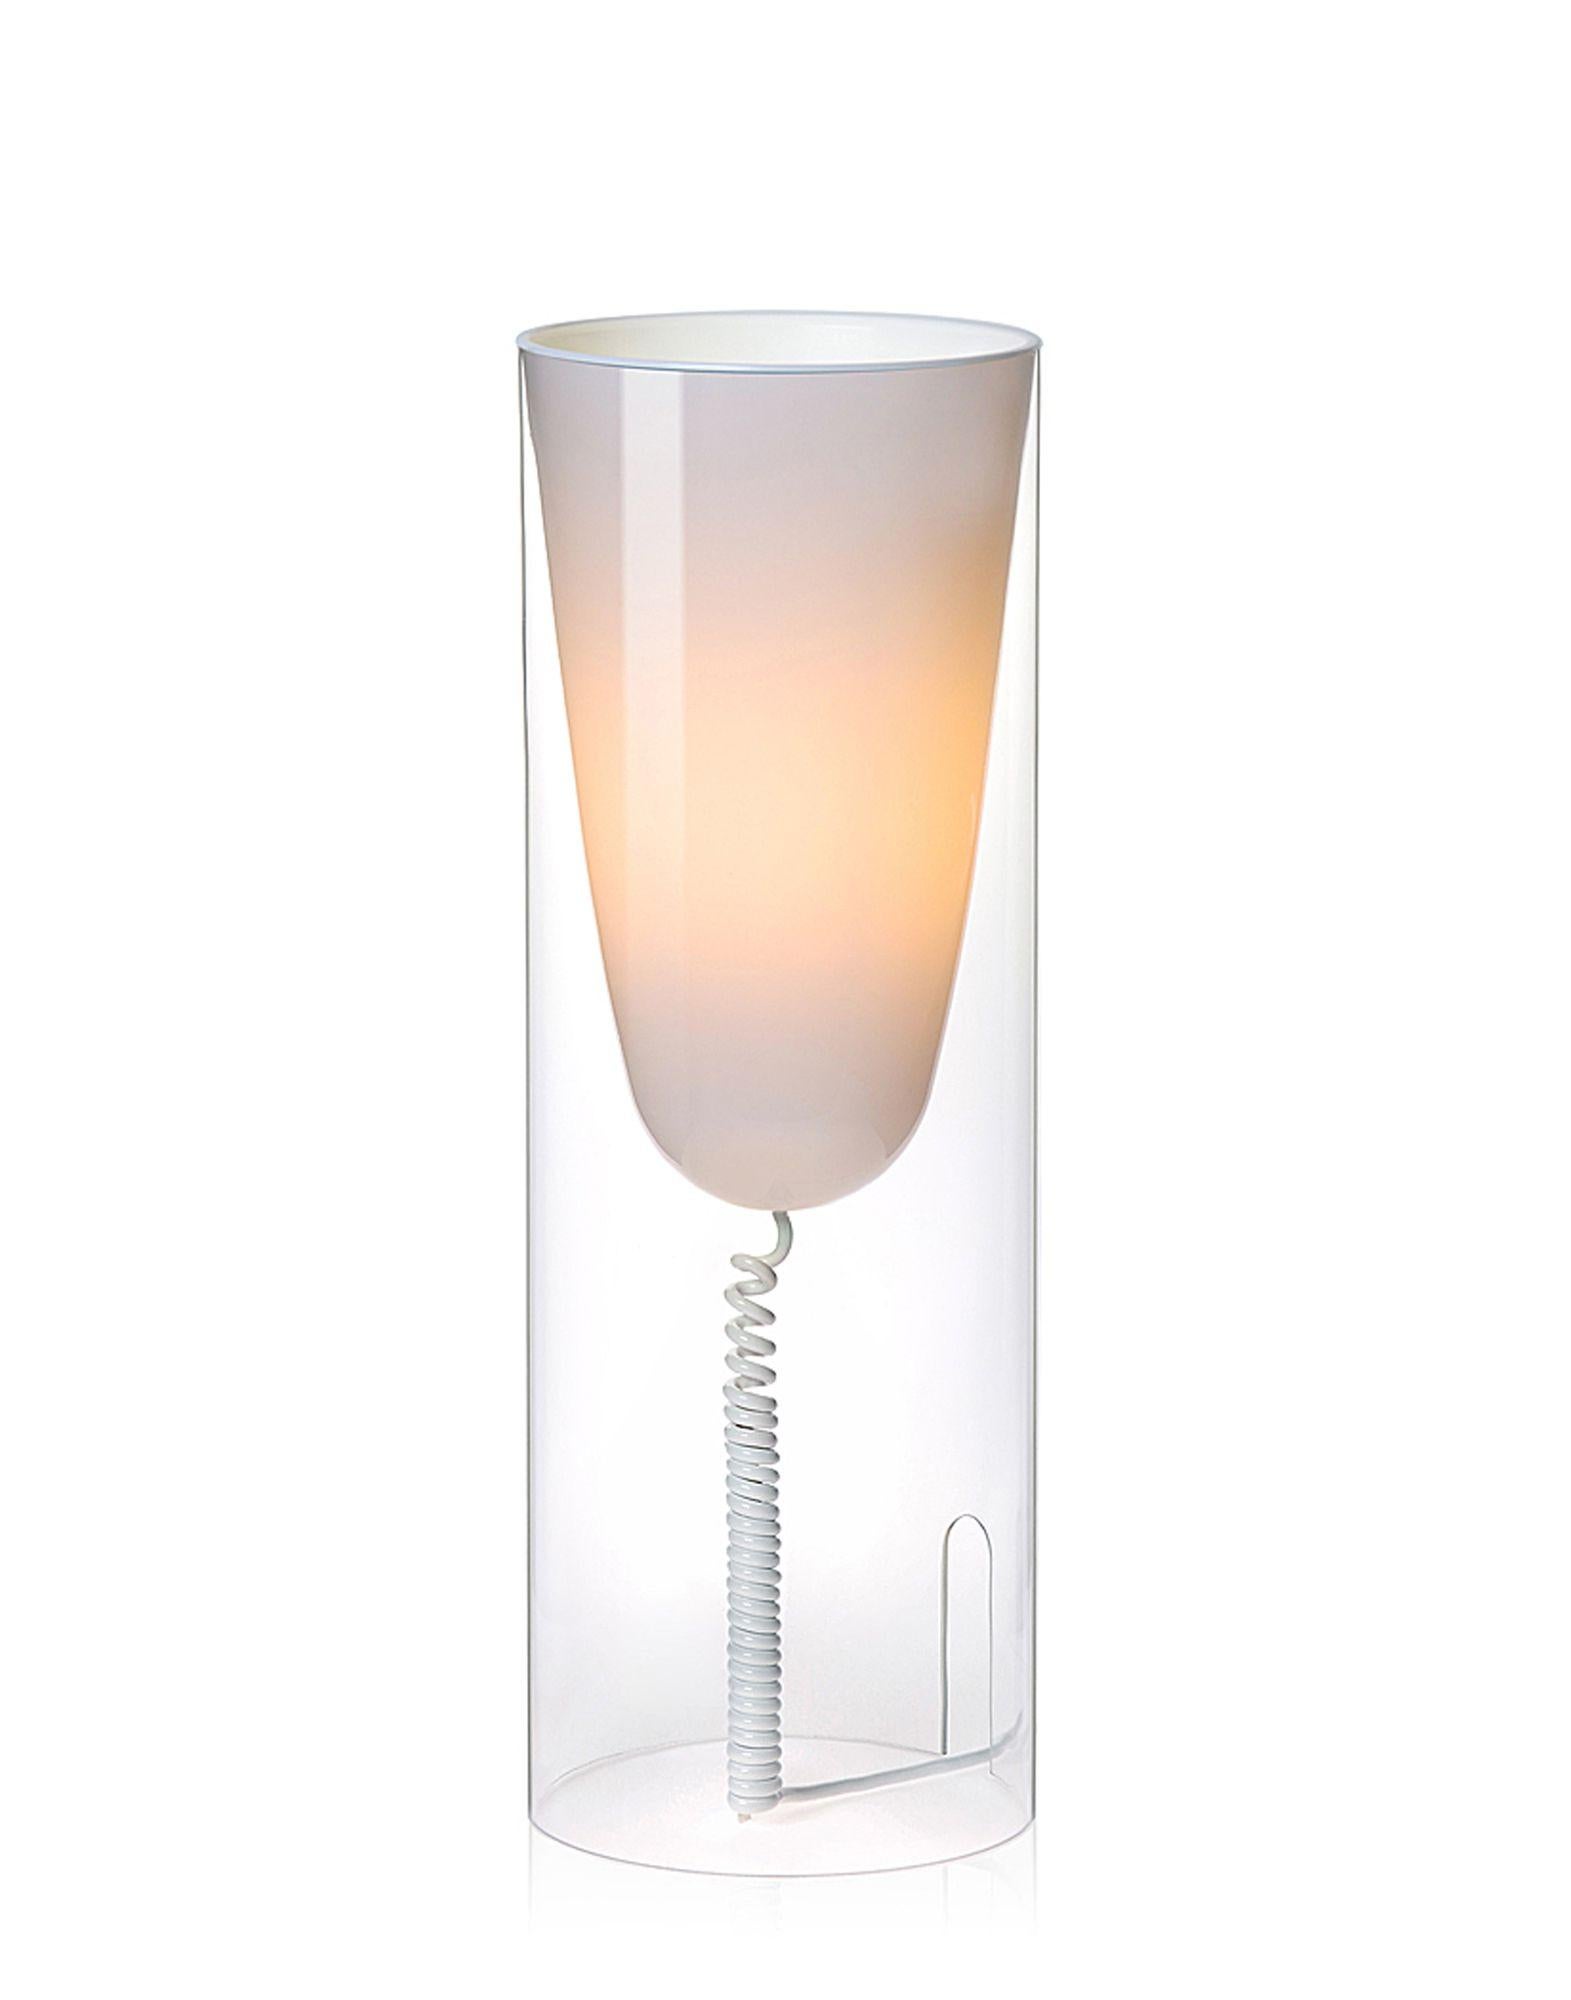 It was conceived from the idea of using a PMMA extruded tube, which creates a surprising smoked effect thanks to an innovative coloring technology. With simple and modern lines, Toobe diffuses a soft and warm light. It comes equipped with an